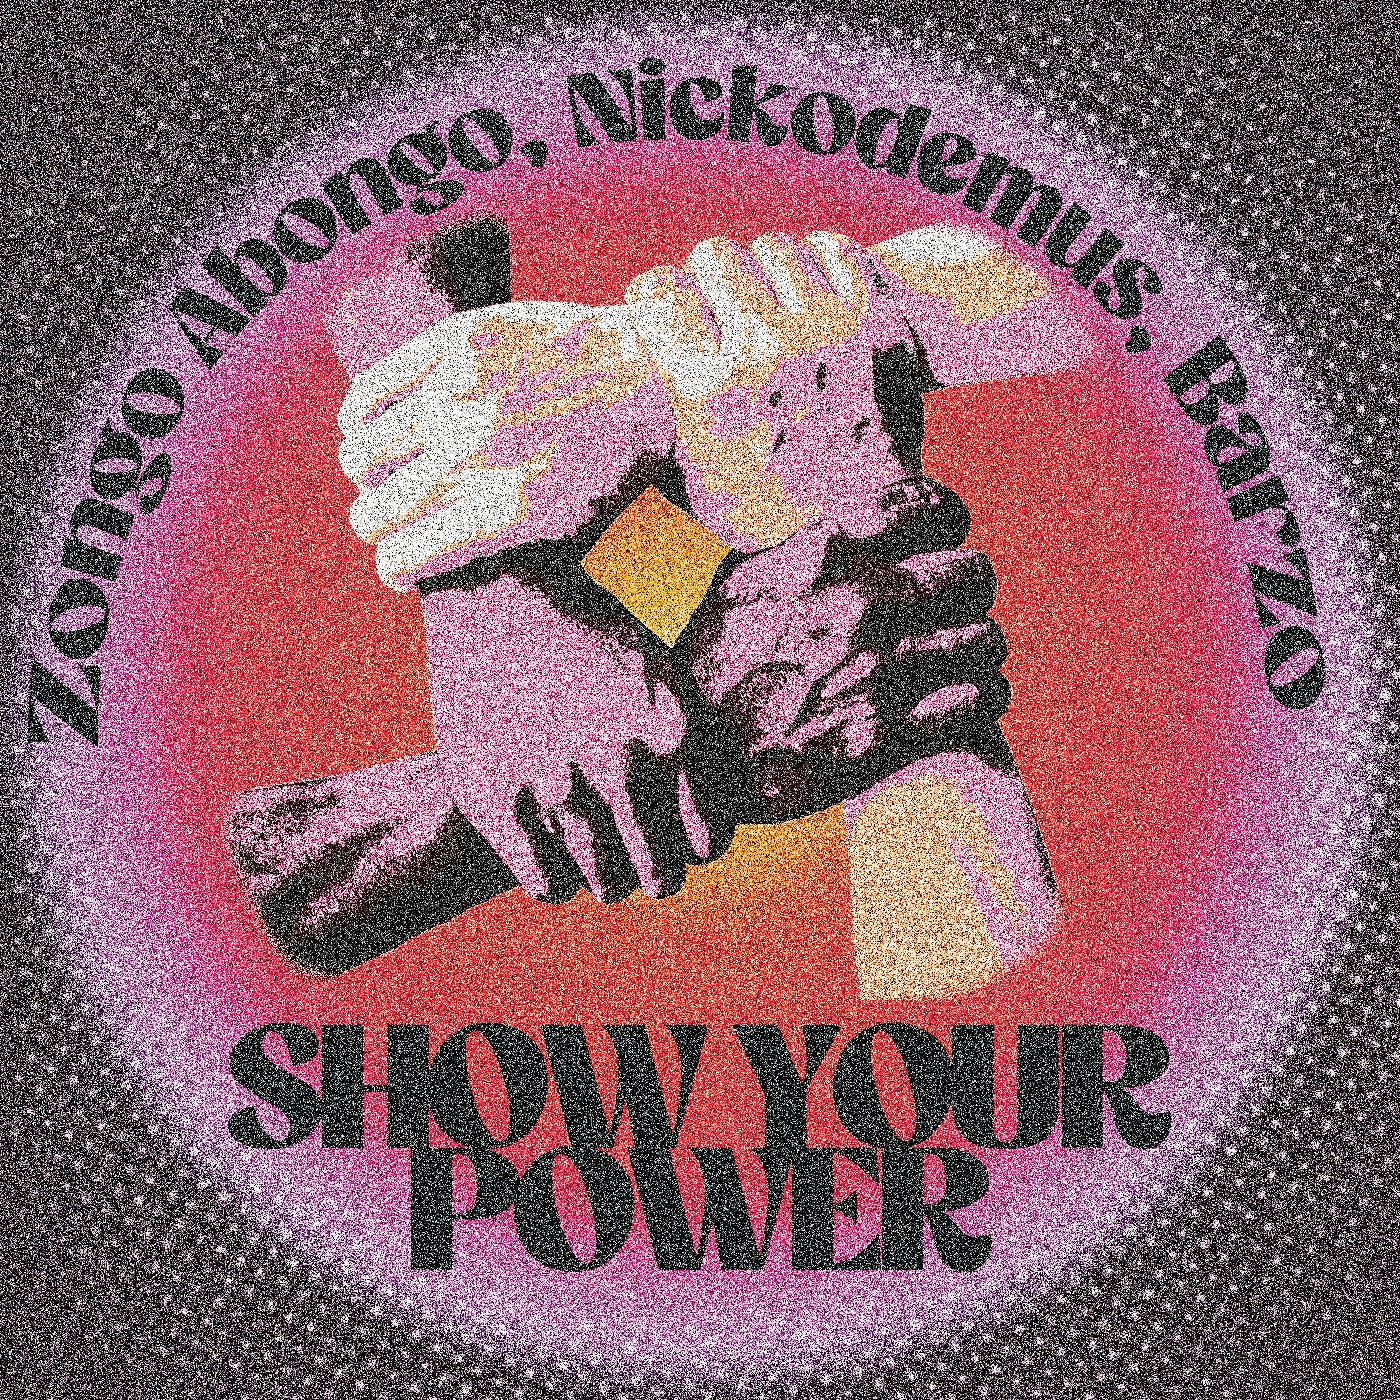 Show Your Power